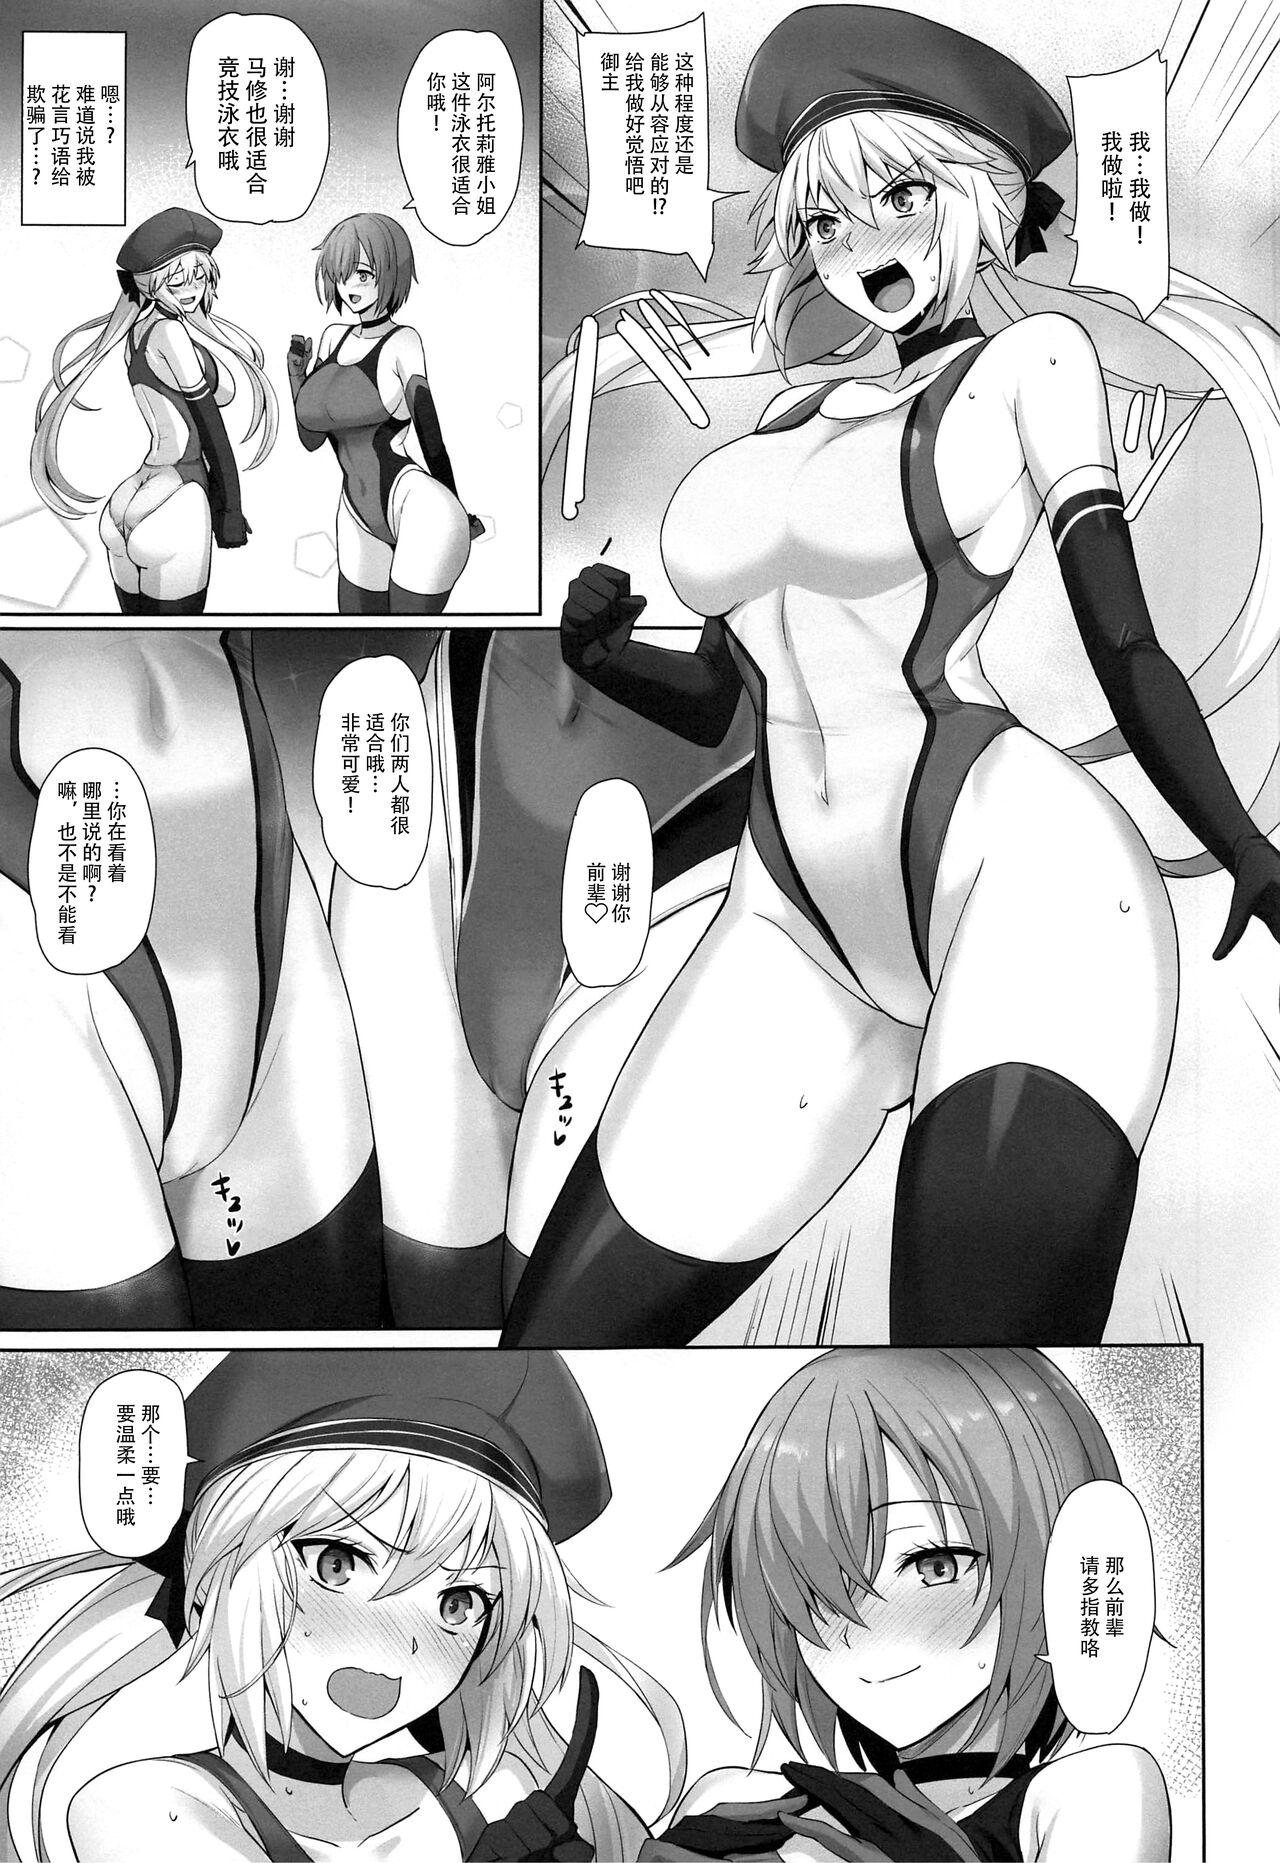 Hot Couple Sex Kyouei Tokusei no Servant to 2 - Fate grand order Camsex - Page 4